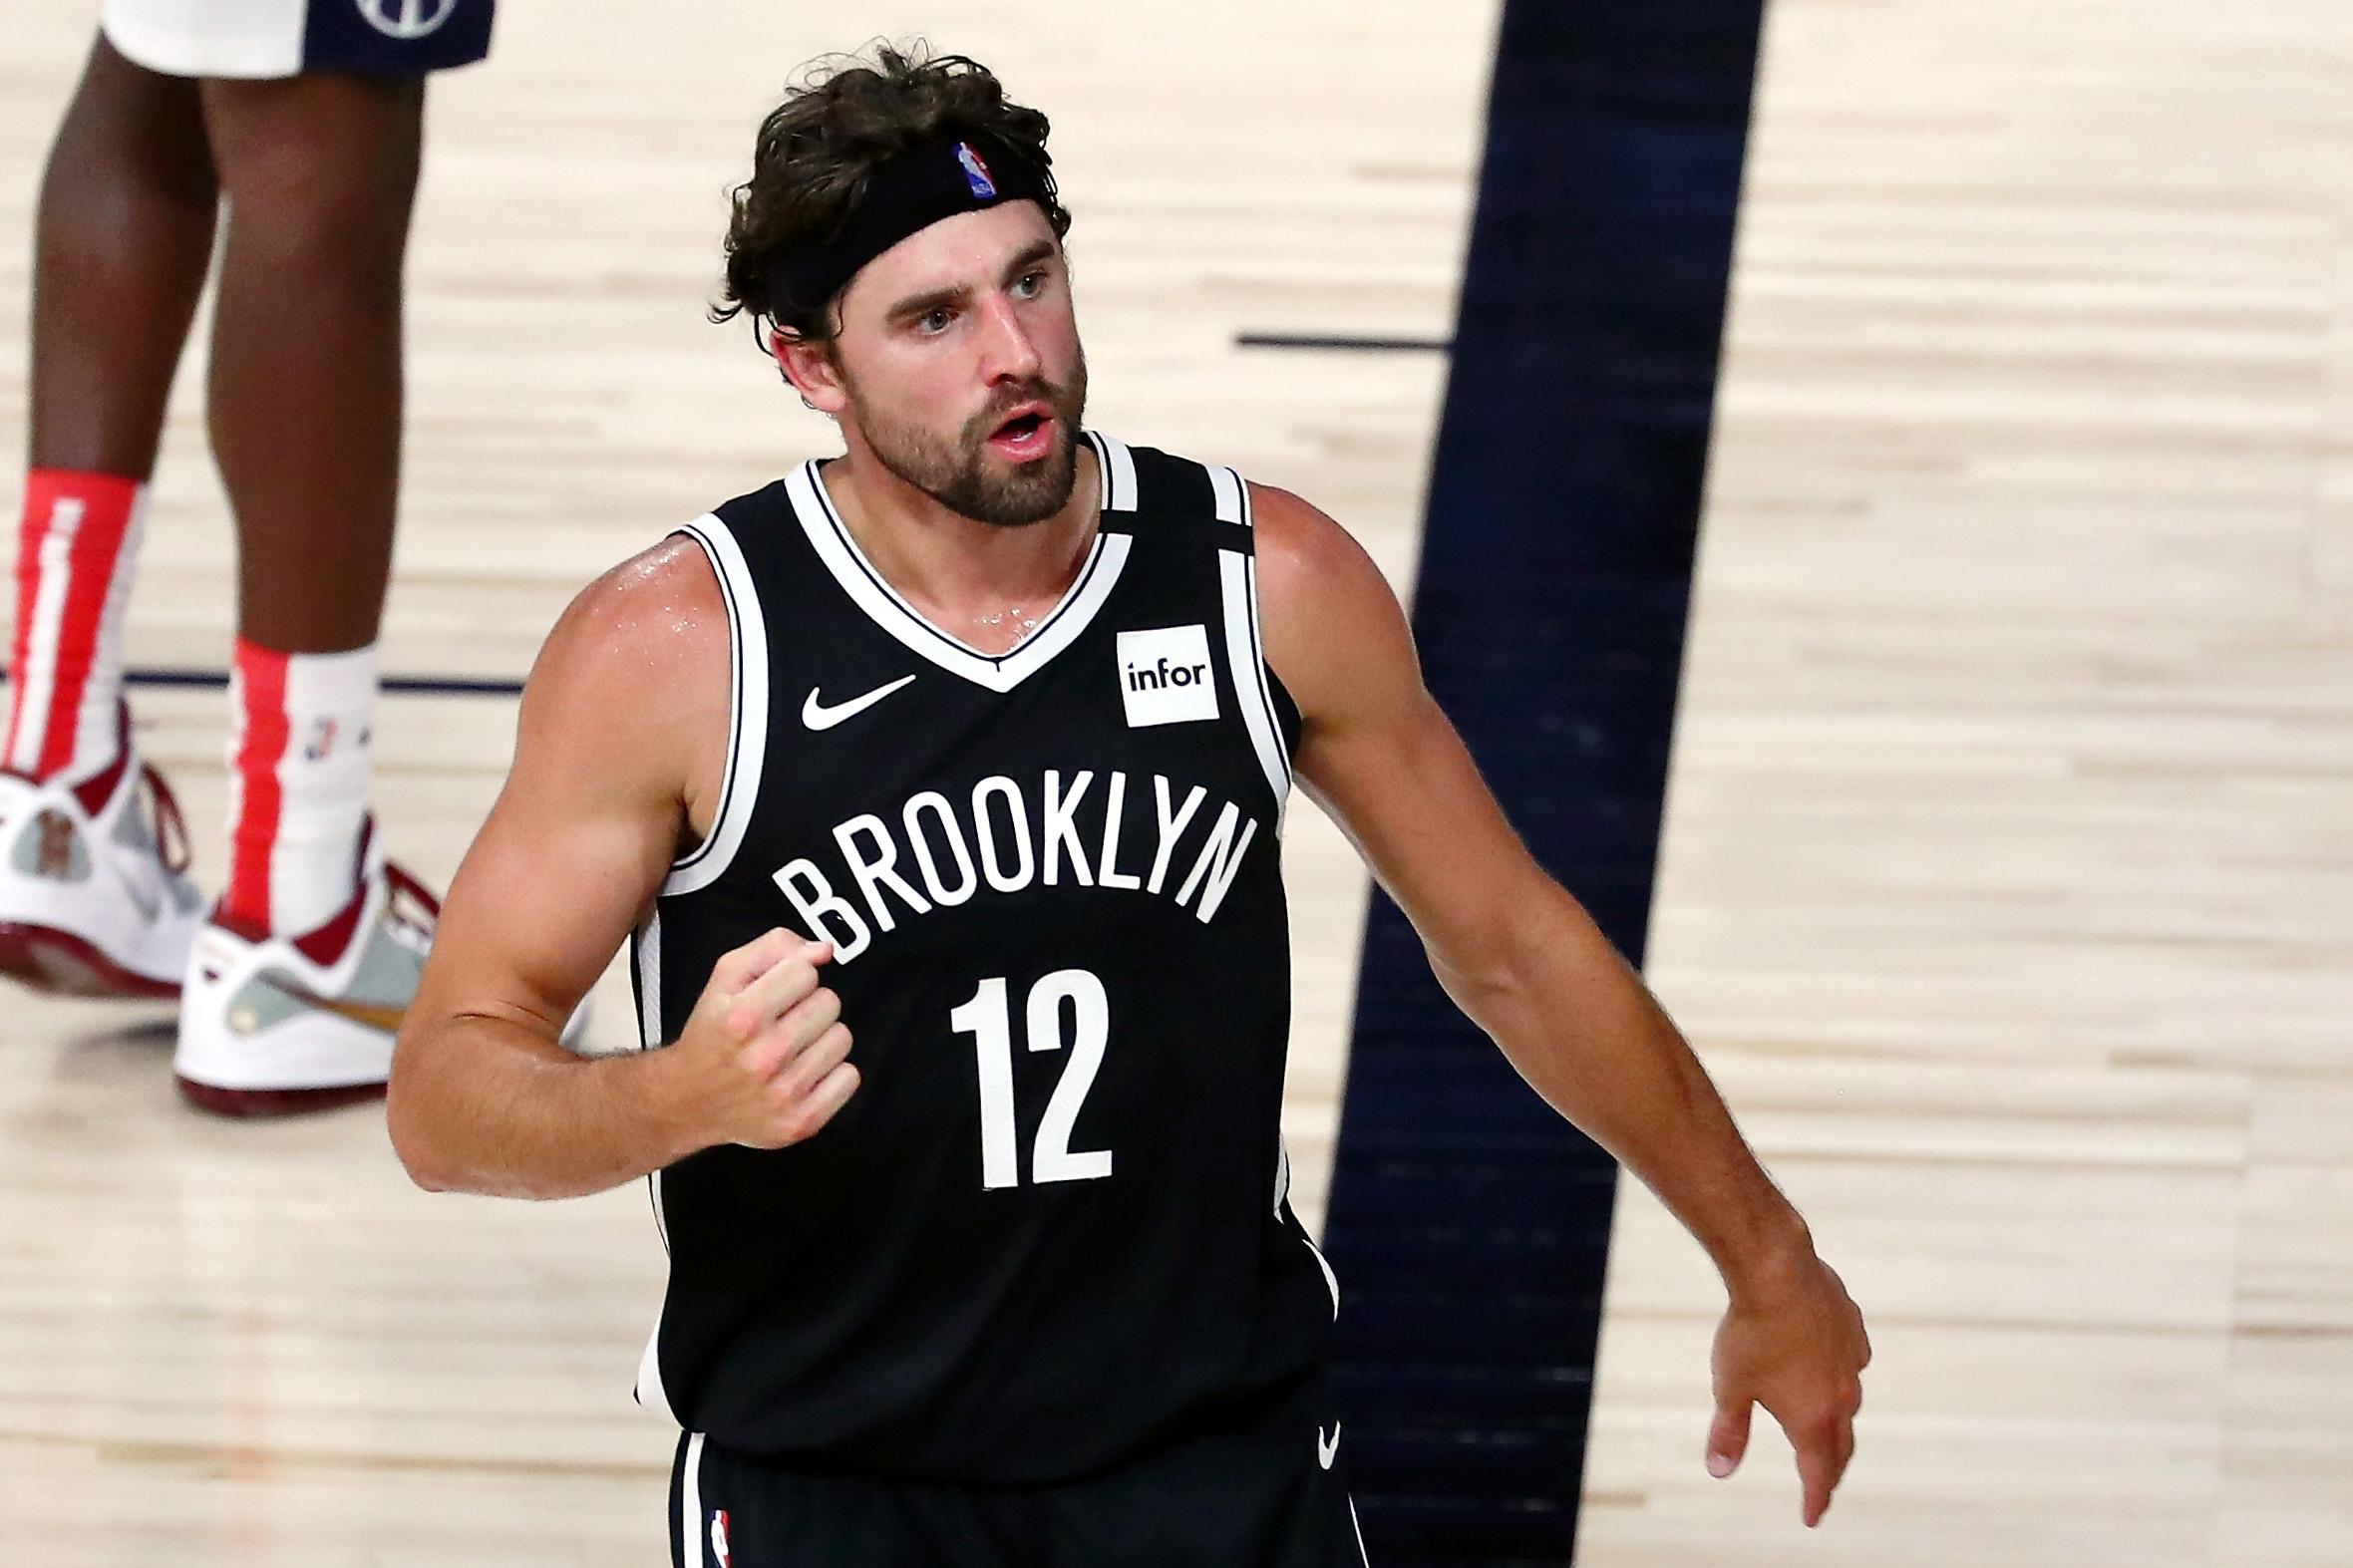 Aug 2, 2020; Lake Buena Vista, Florida, USA; Brooklyn Nets forward Joe Harris (12) reacts after a play against the Washington Wizards in the second half of a NBA basketball game at HP Field House. The Brooklyn Nets won 118-110. Mandatory Credit: Kim Klement-USA TODAY Sports / © Kim Klement-USA TODAY Sports